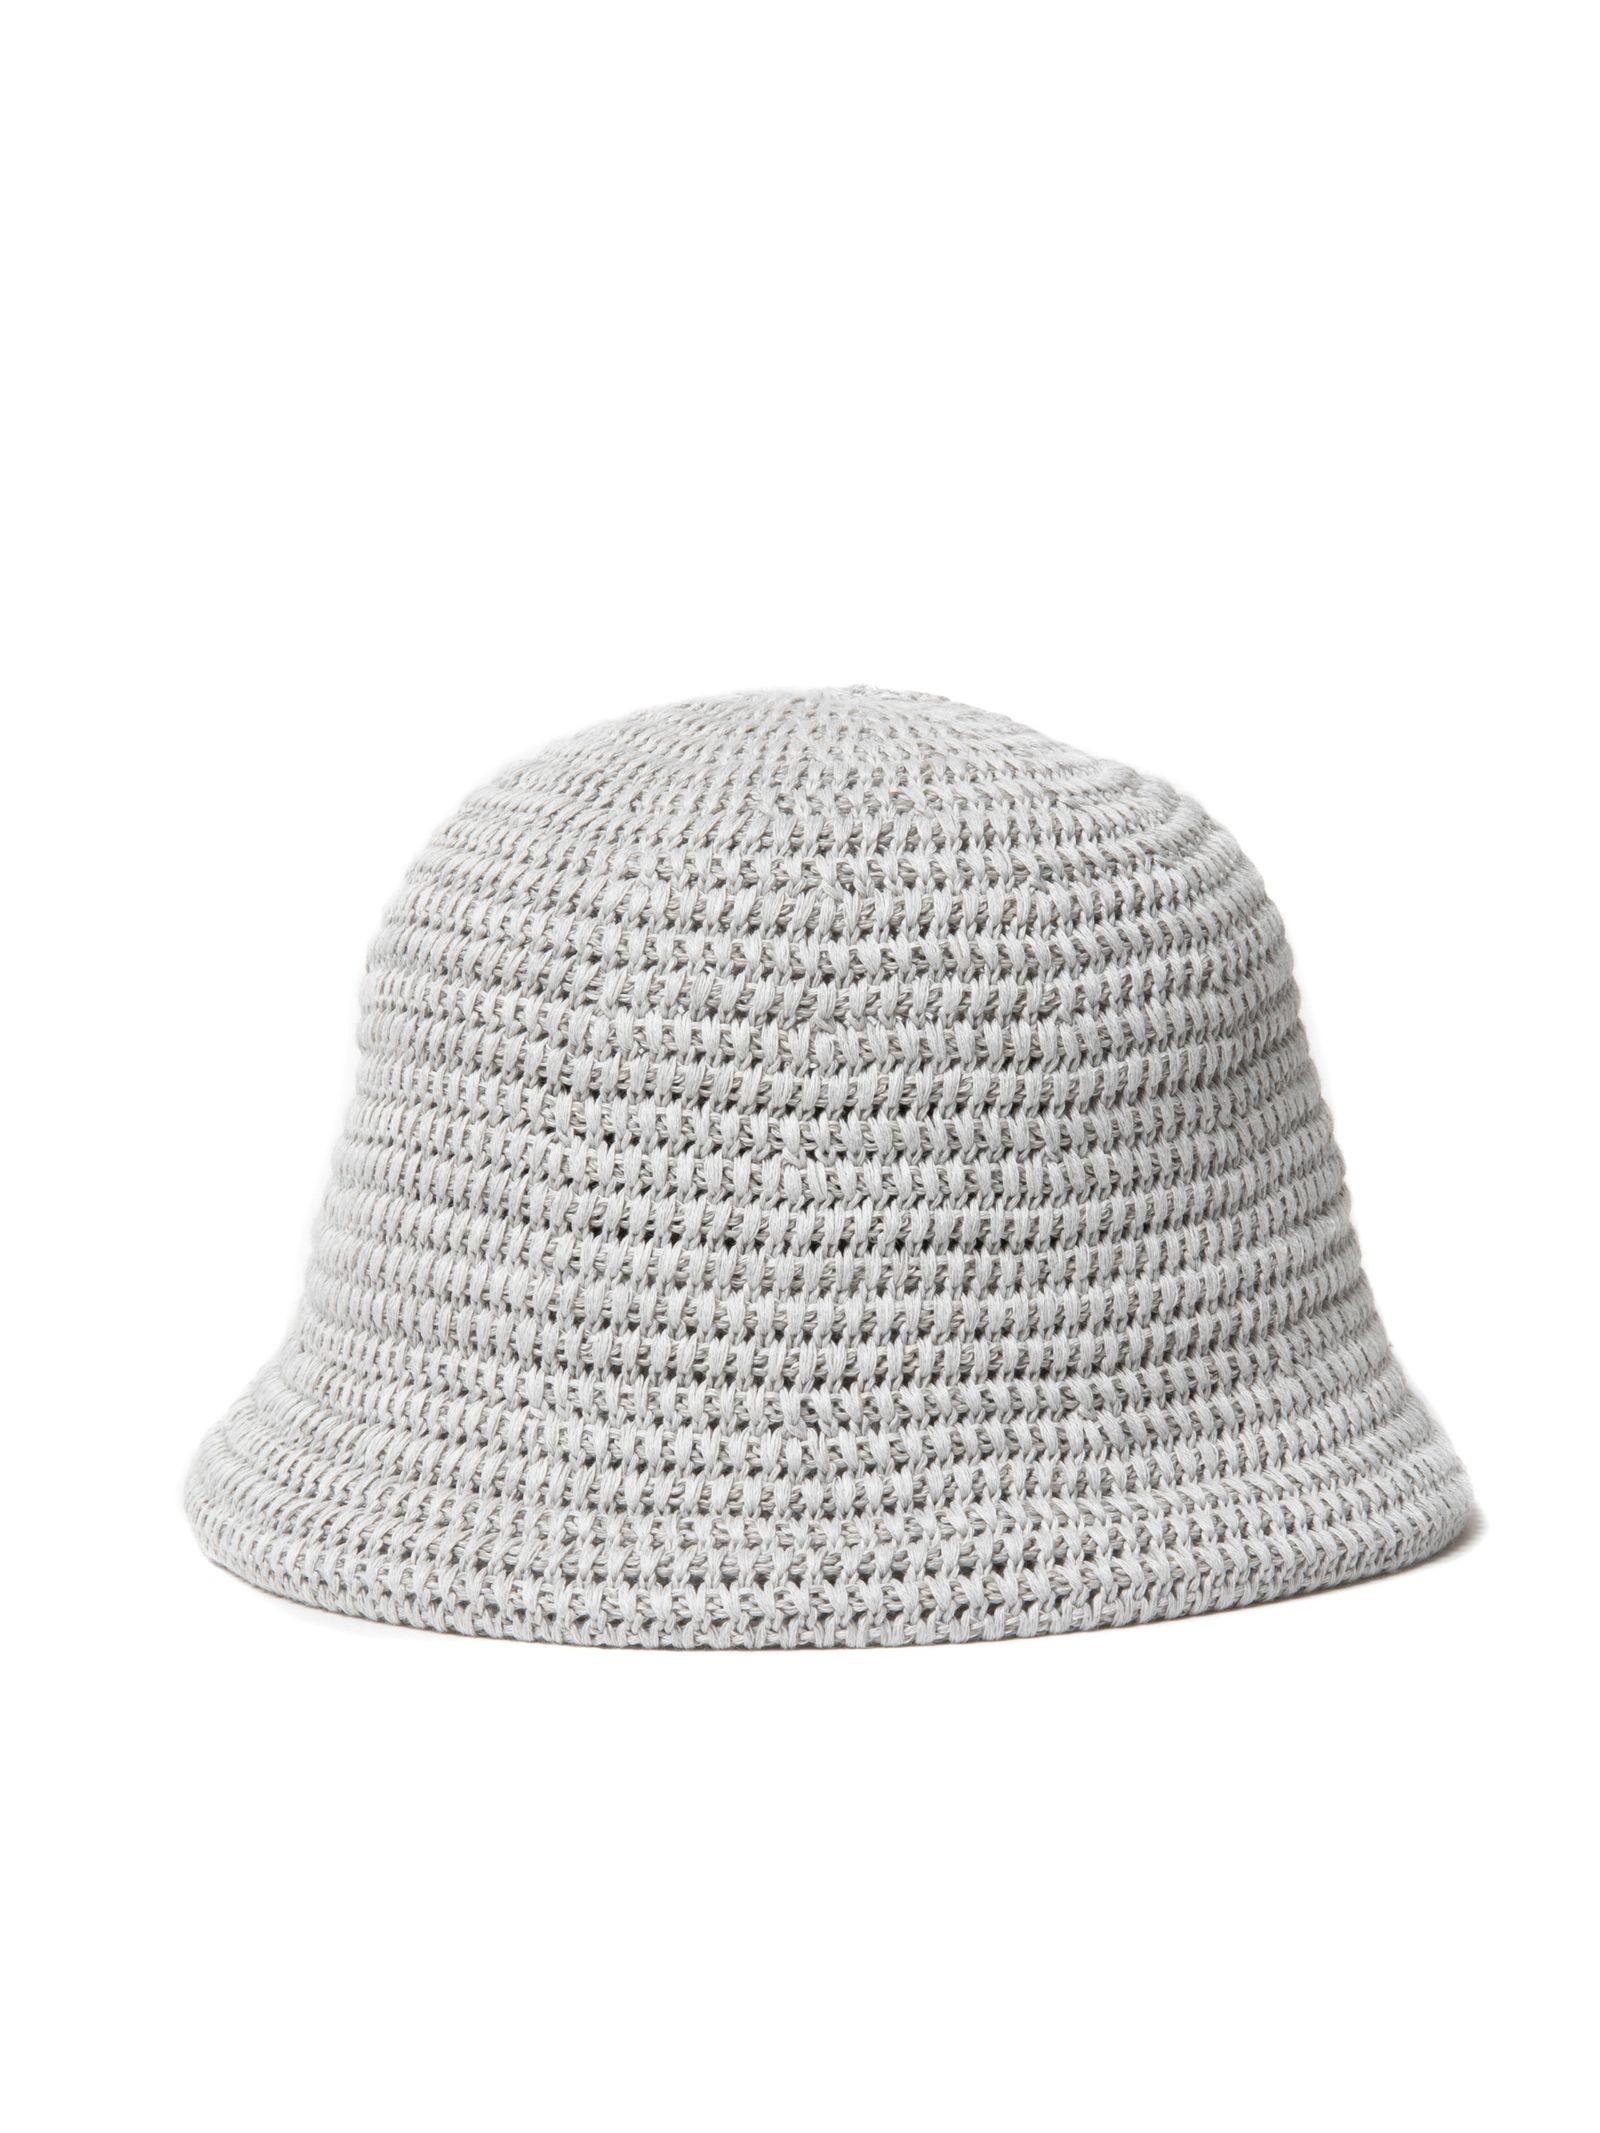 COOTIE PRODUCTIONS - Knit Crusher Hat (ASH GRAY) / ニット 